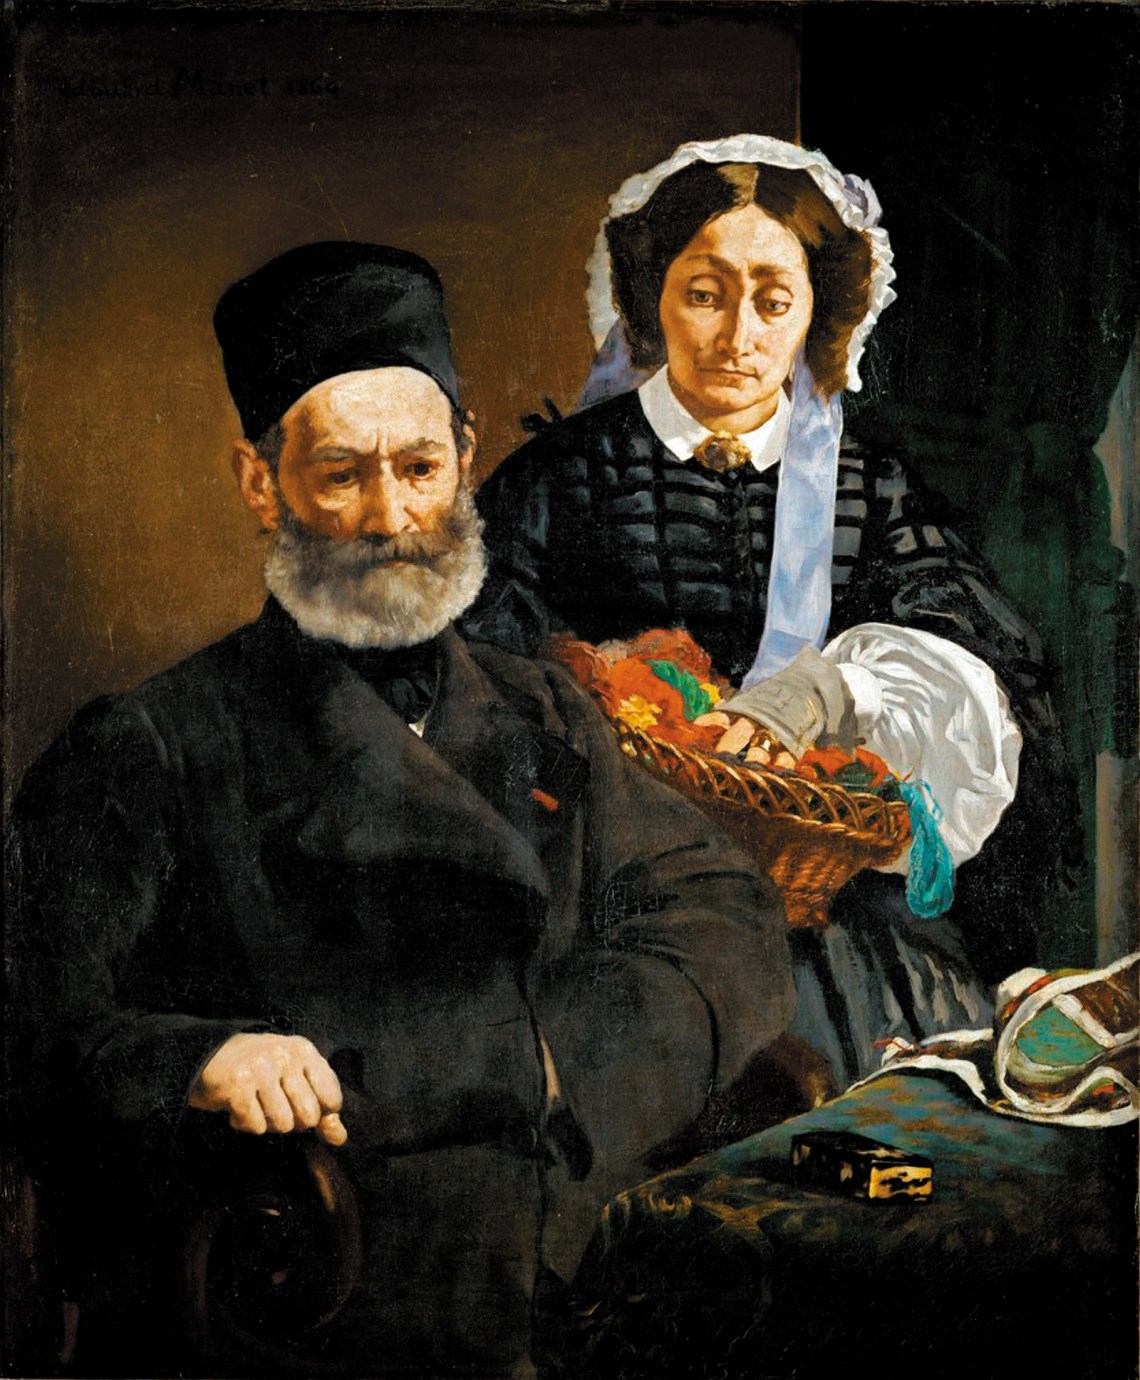 Monsieur and Madame Auguste Manet; painting by Édouard Manet